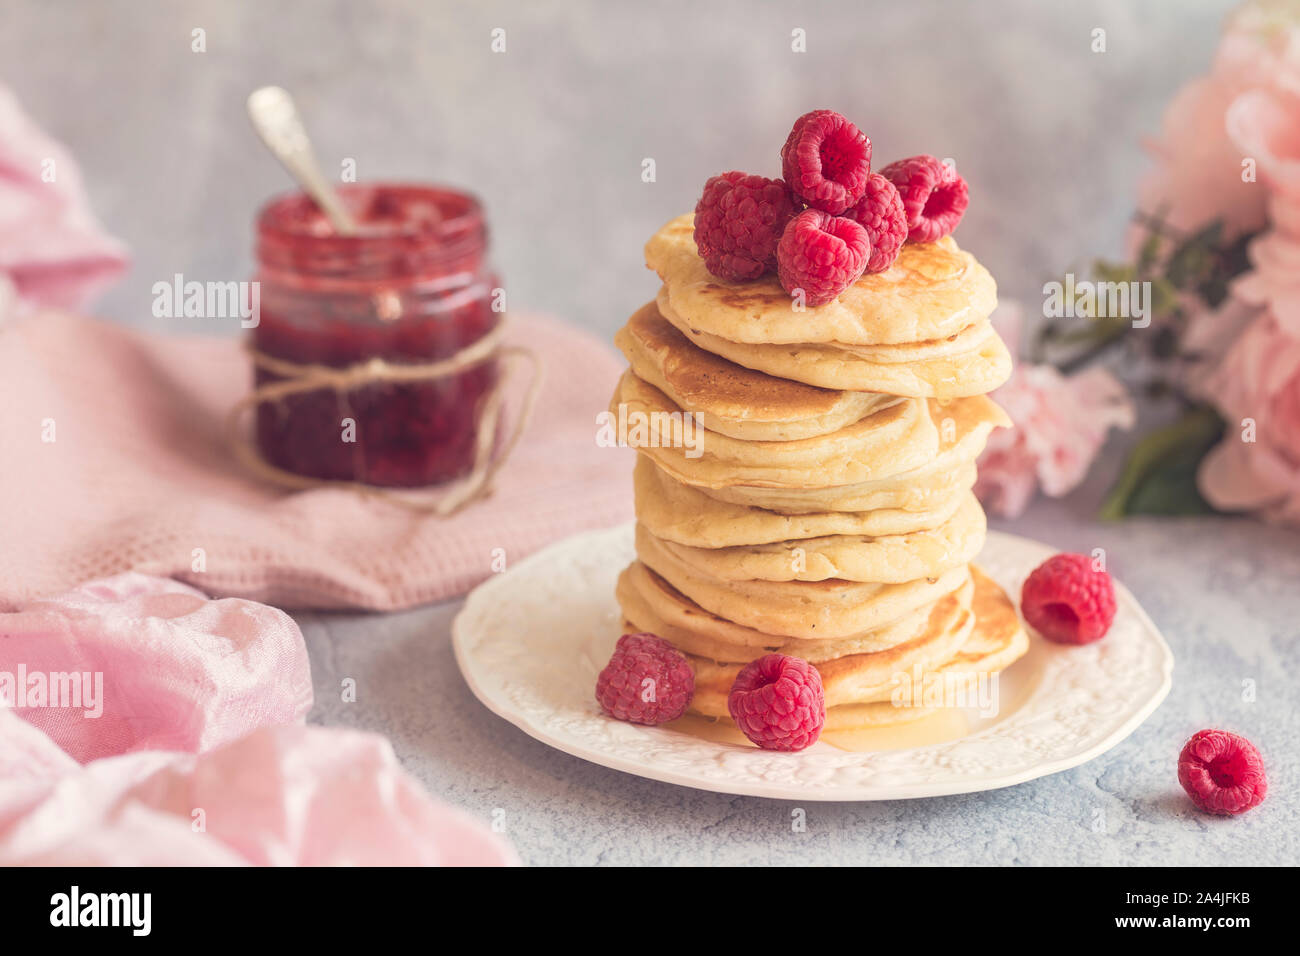 Pancake stack with fresh raspberries on top. There is a jar of jam, some flowers and a pink fabric in the background. The background is in mixed shade Stock Photo